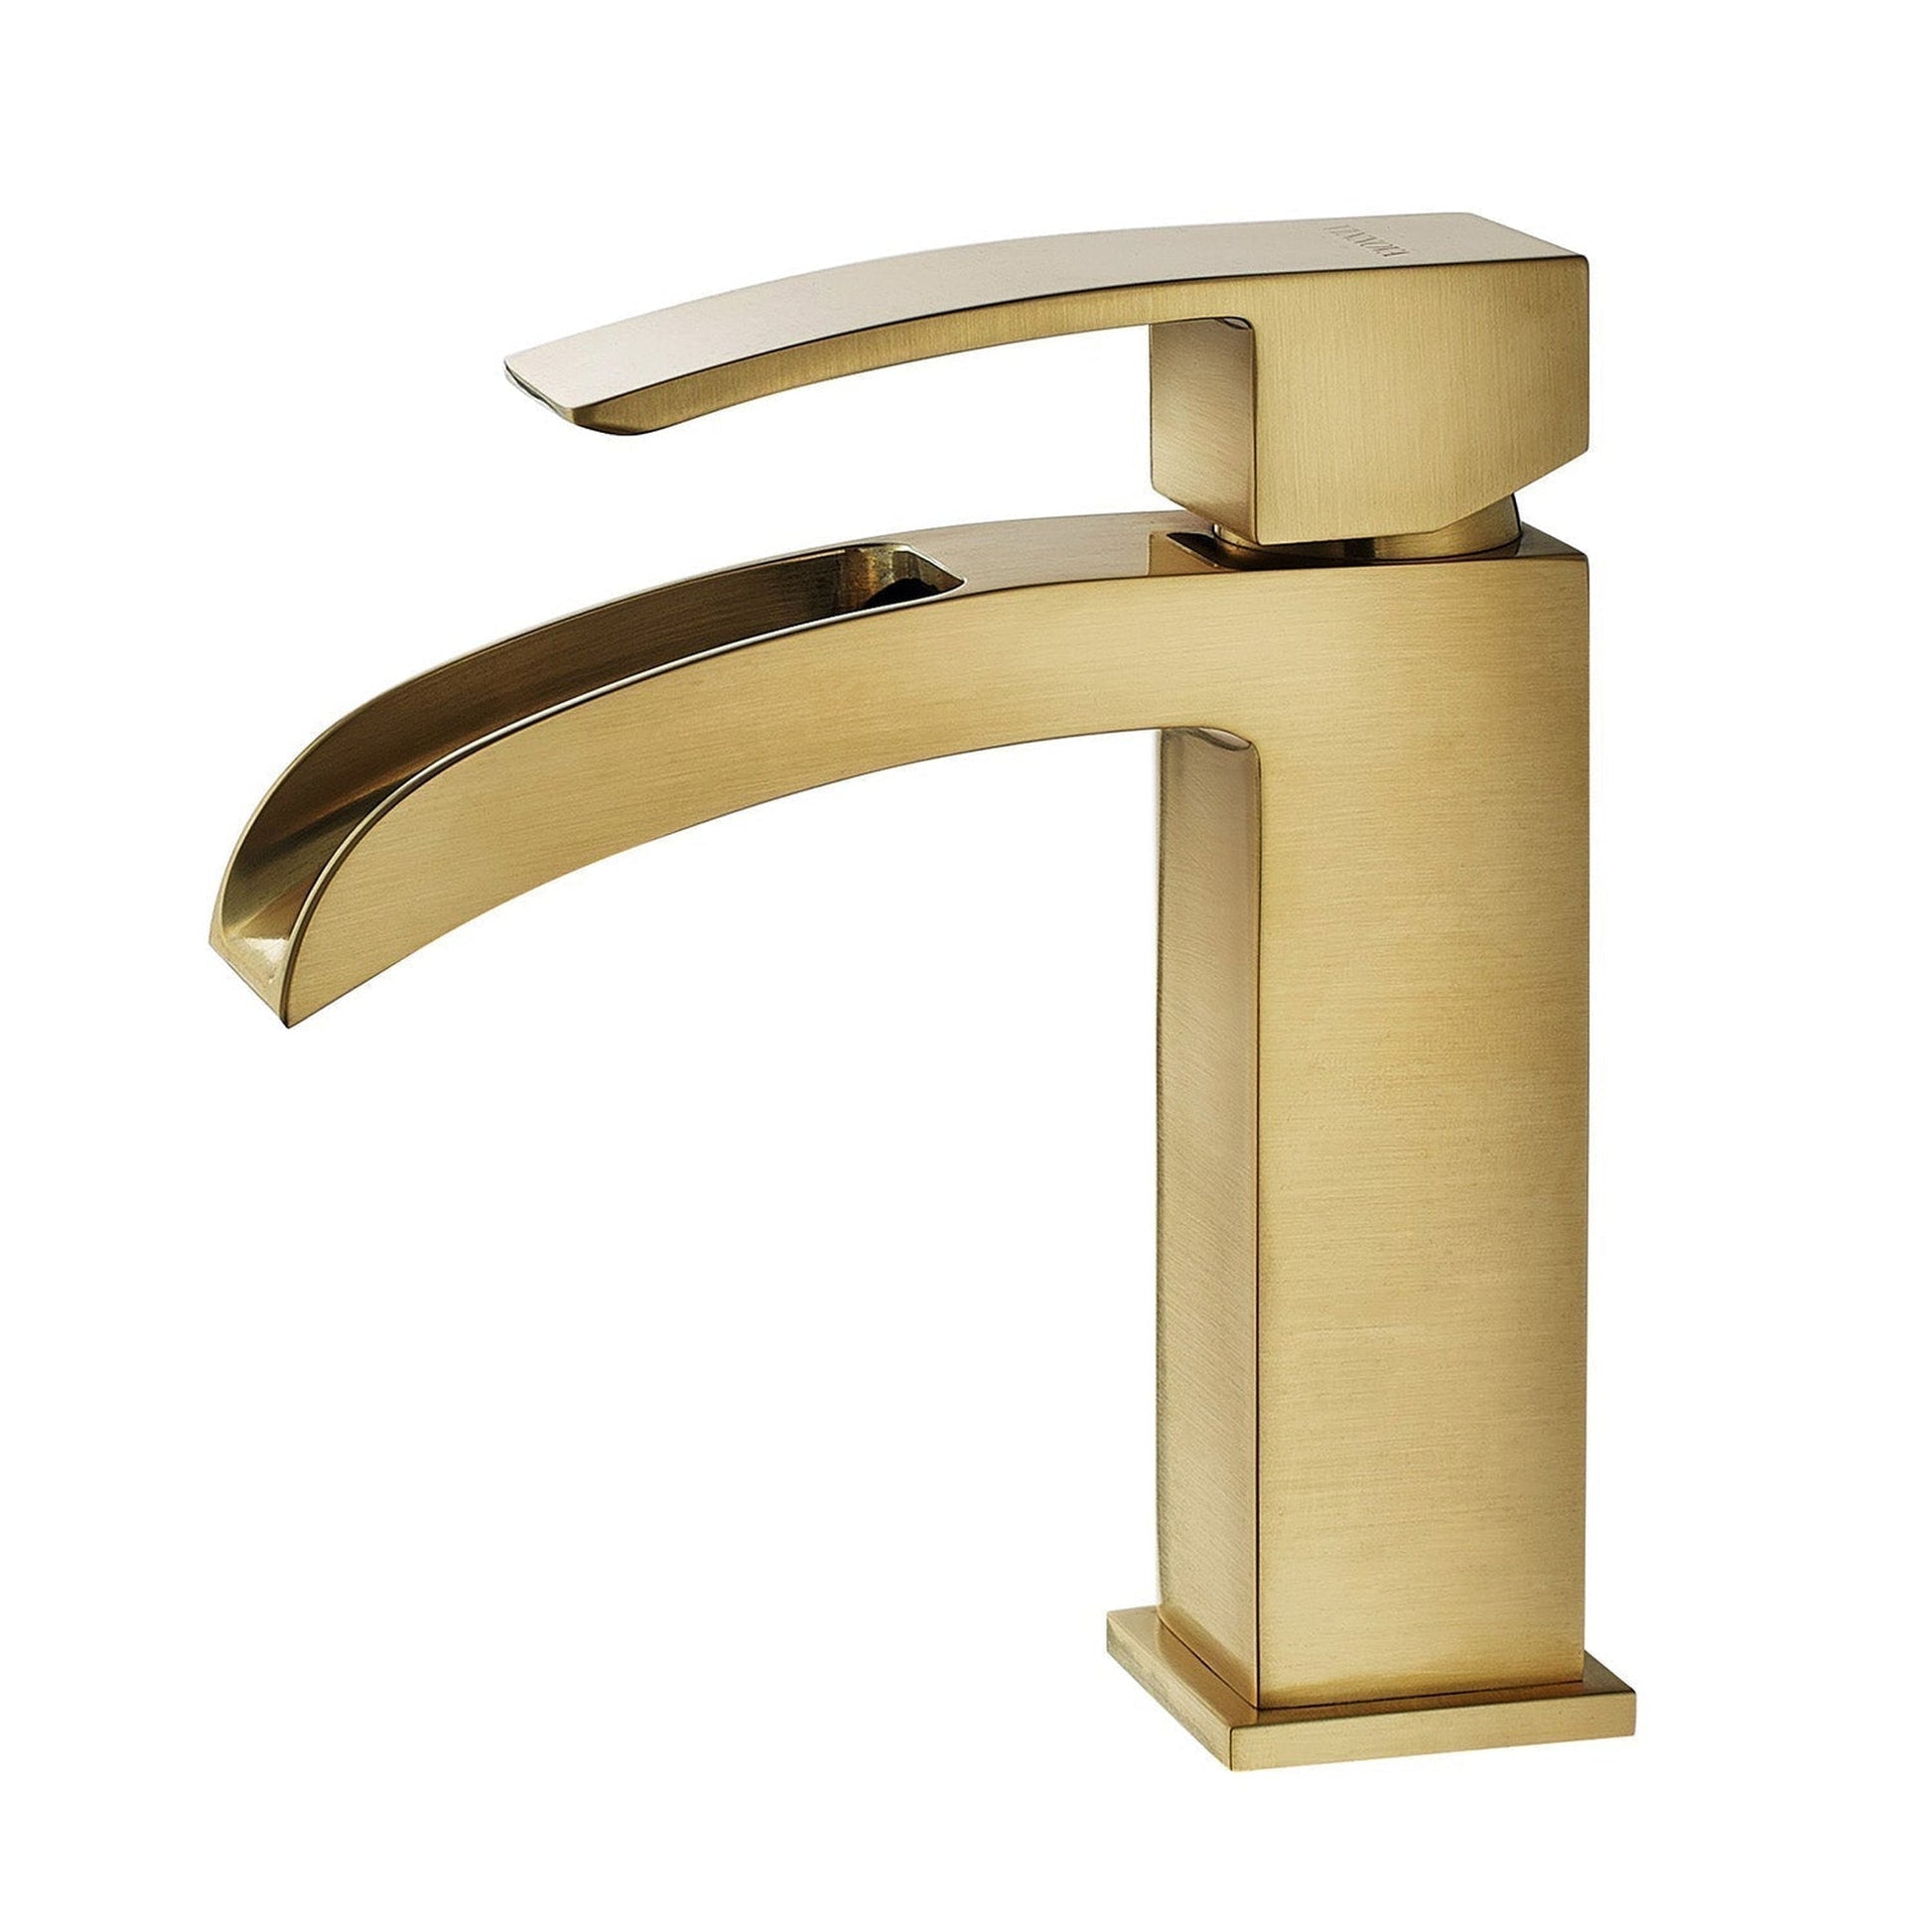 Vinnova Liberty 6" Single Hole Brushed Gold Low Arc Waterfall Bathroom Sink Faucet